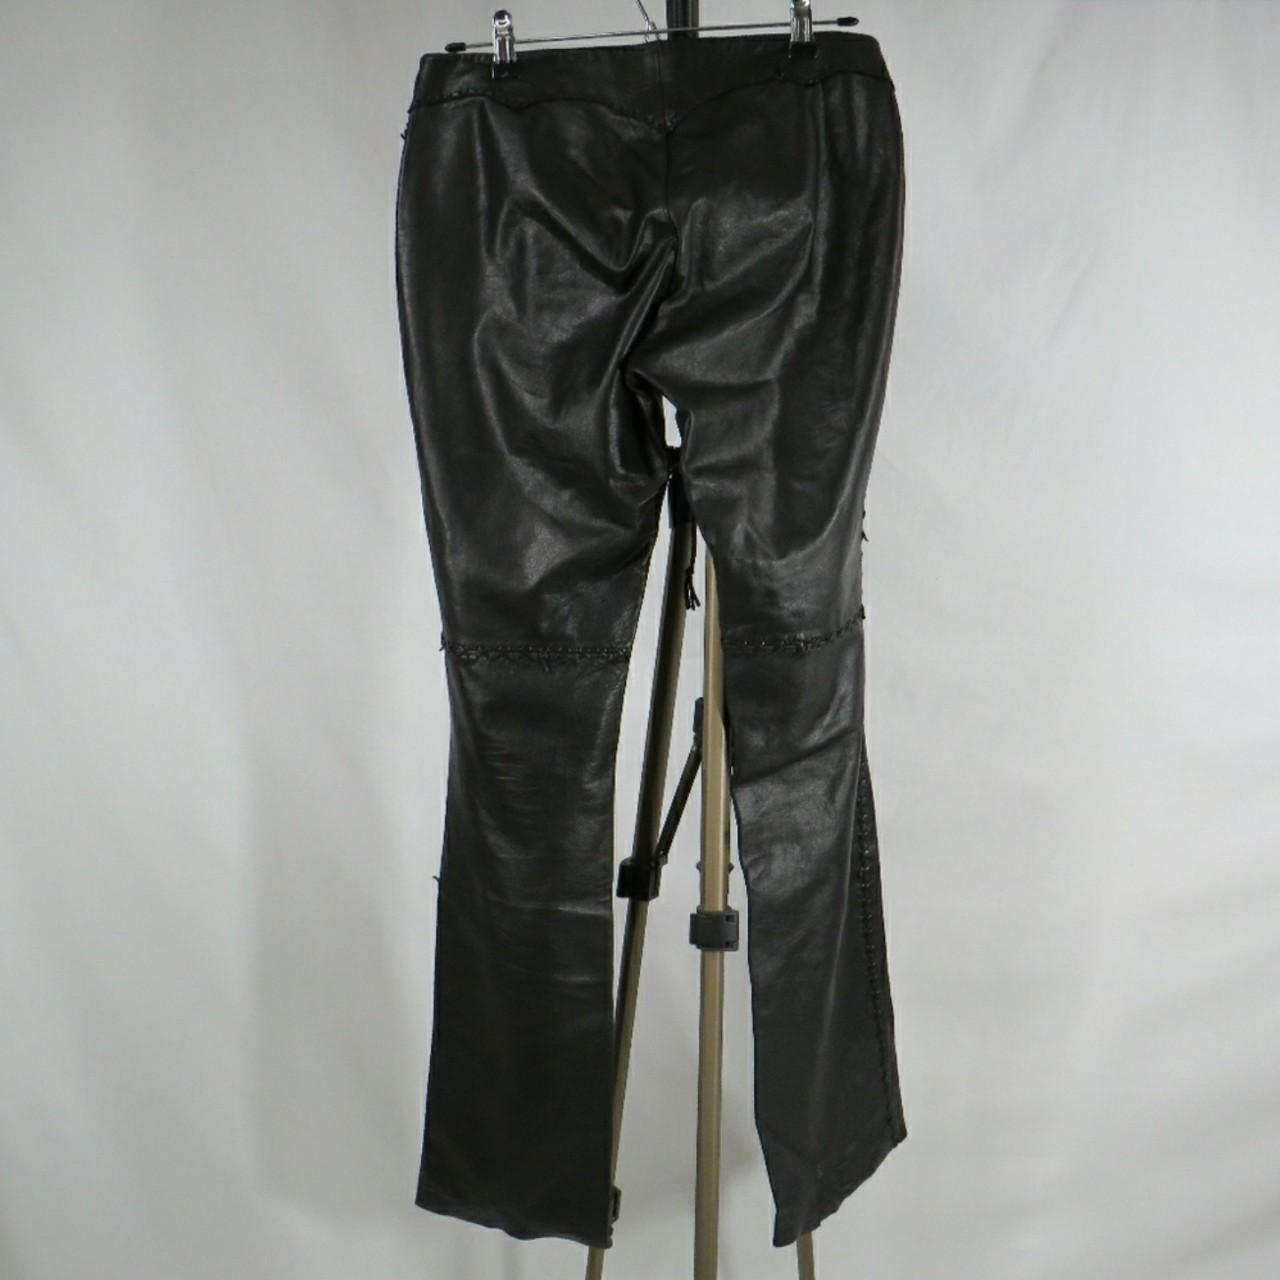 Extremely rare NBL leather pants with leather... - Depop